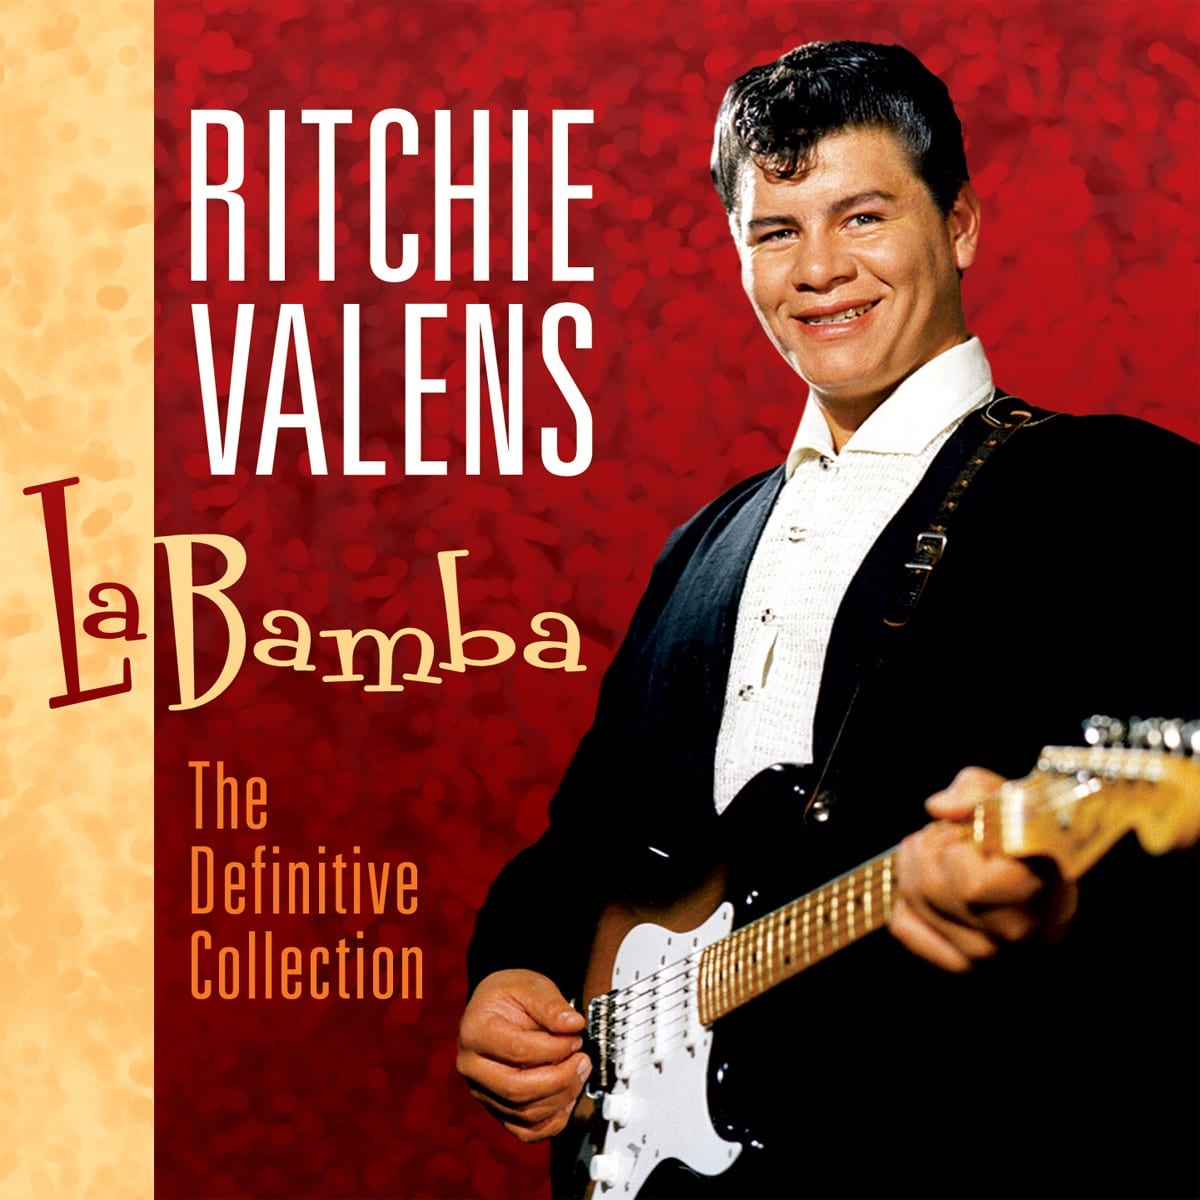 American Icons: Ritchie Valens